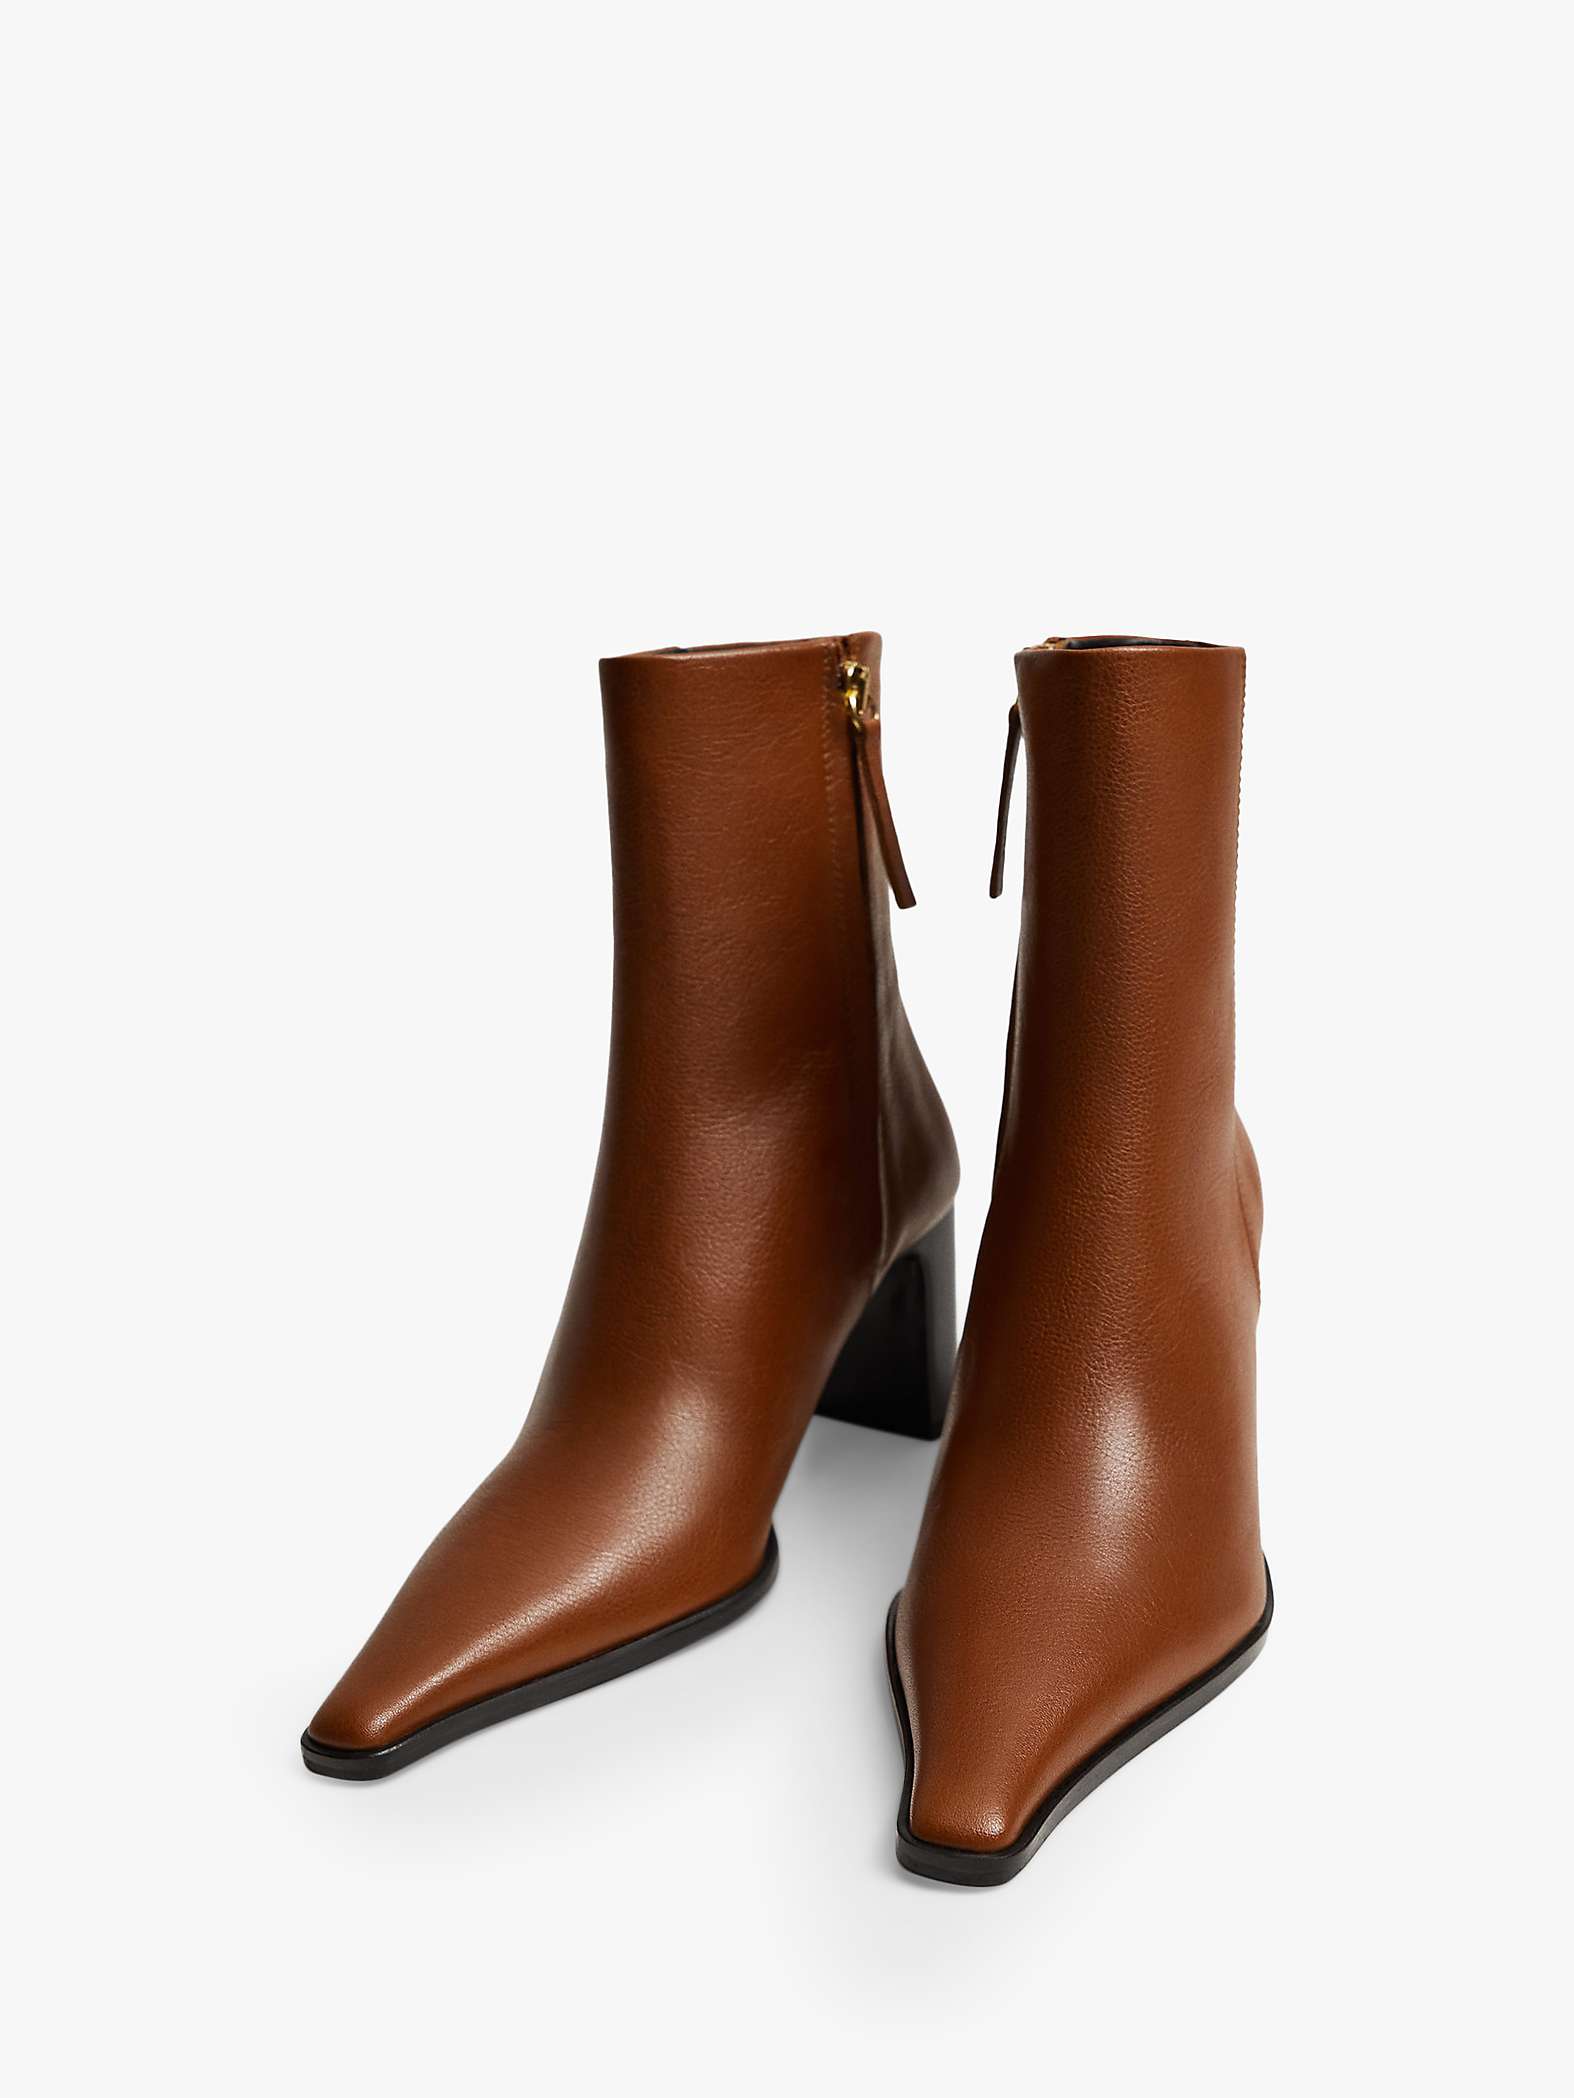 Mango Leather Pointed Toe Ankle Boots, Brown at John Lewis & Partners